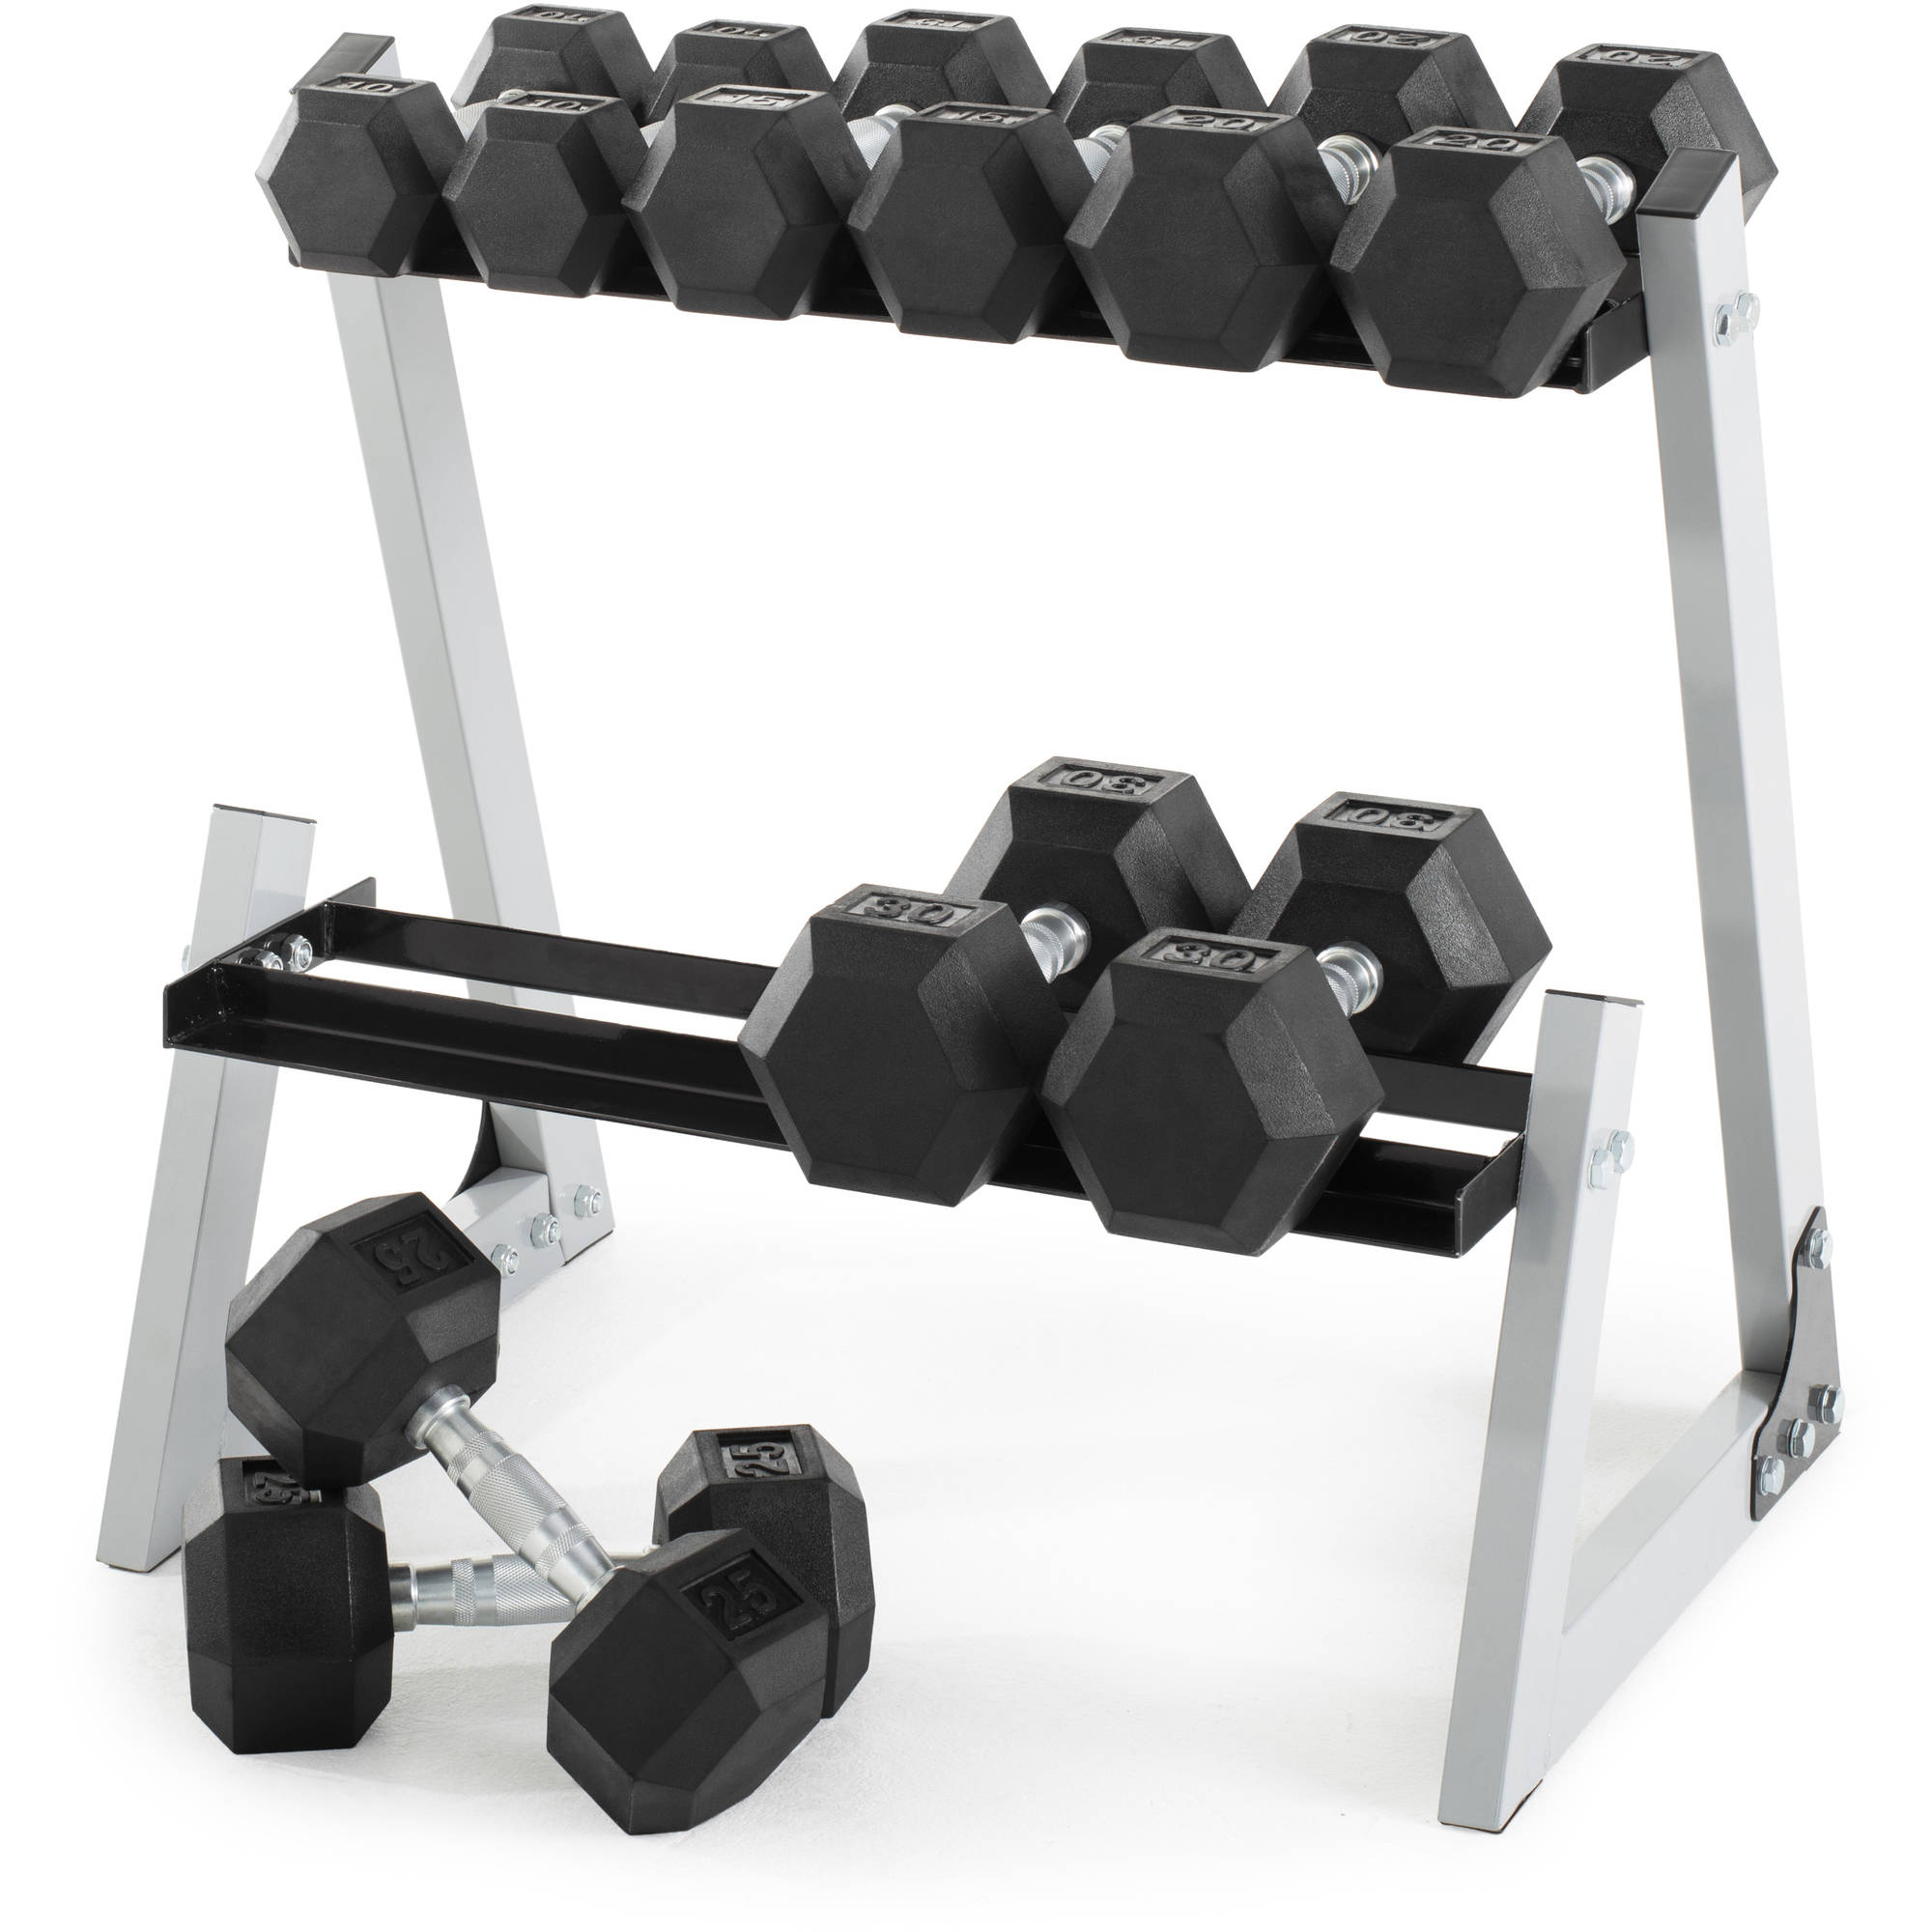 Weider 200 lb Rubber Hex Dumbbell Weight Set, 10-30 lb with Weight Rack